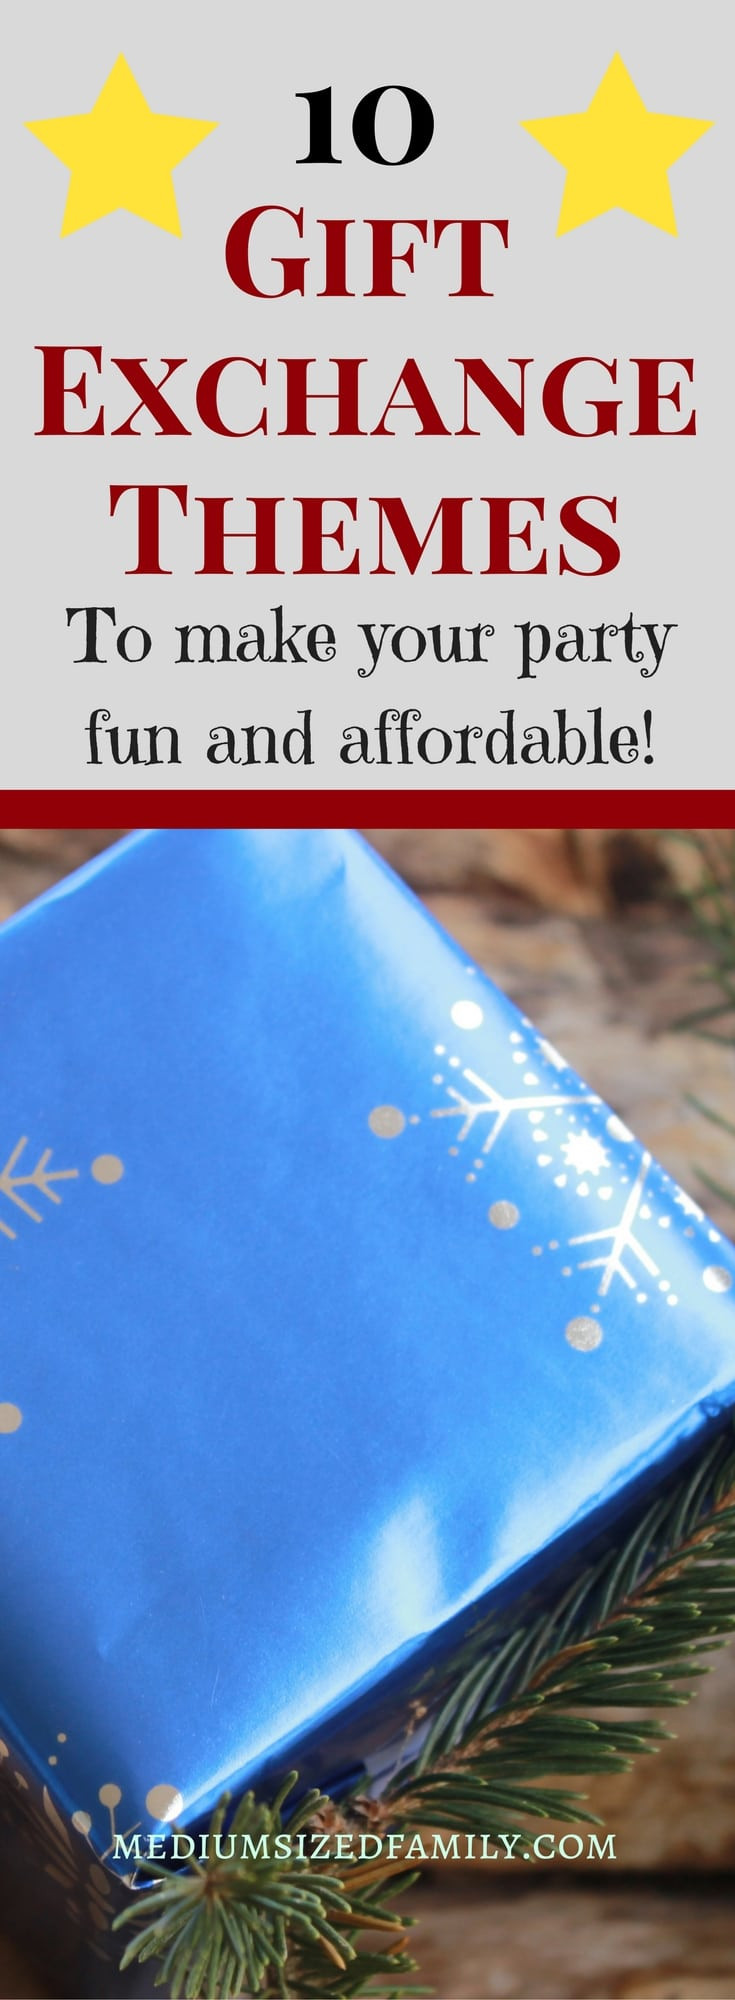 Holiday Party Gift Exchange Ideas
 10 Gift Exchange Themes That Will Make Giving More Fun